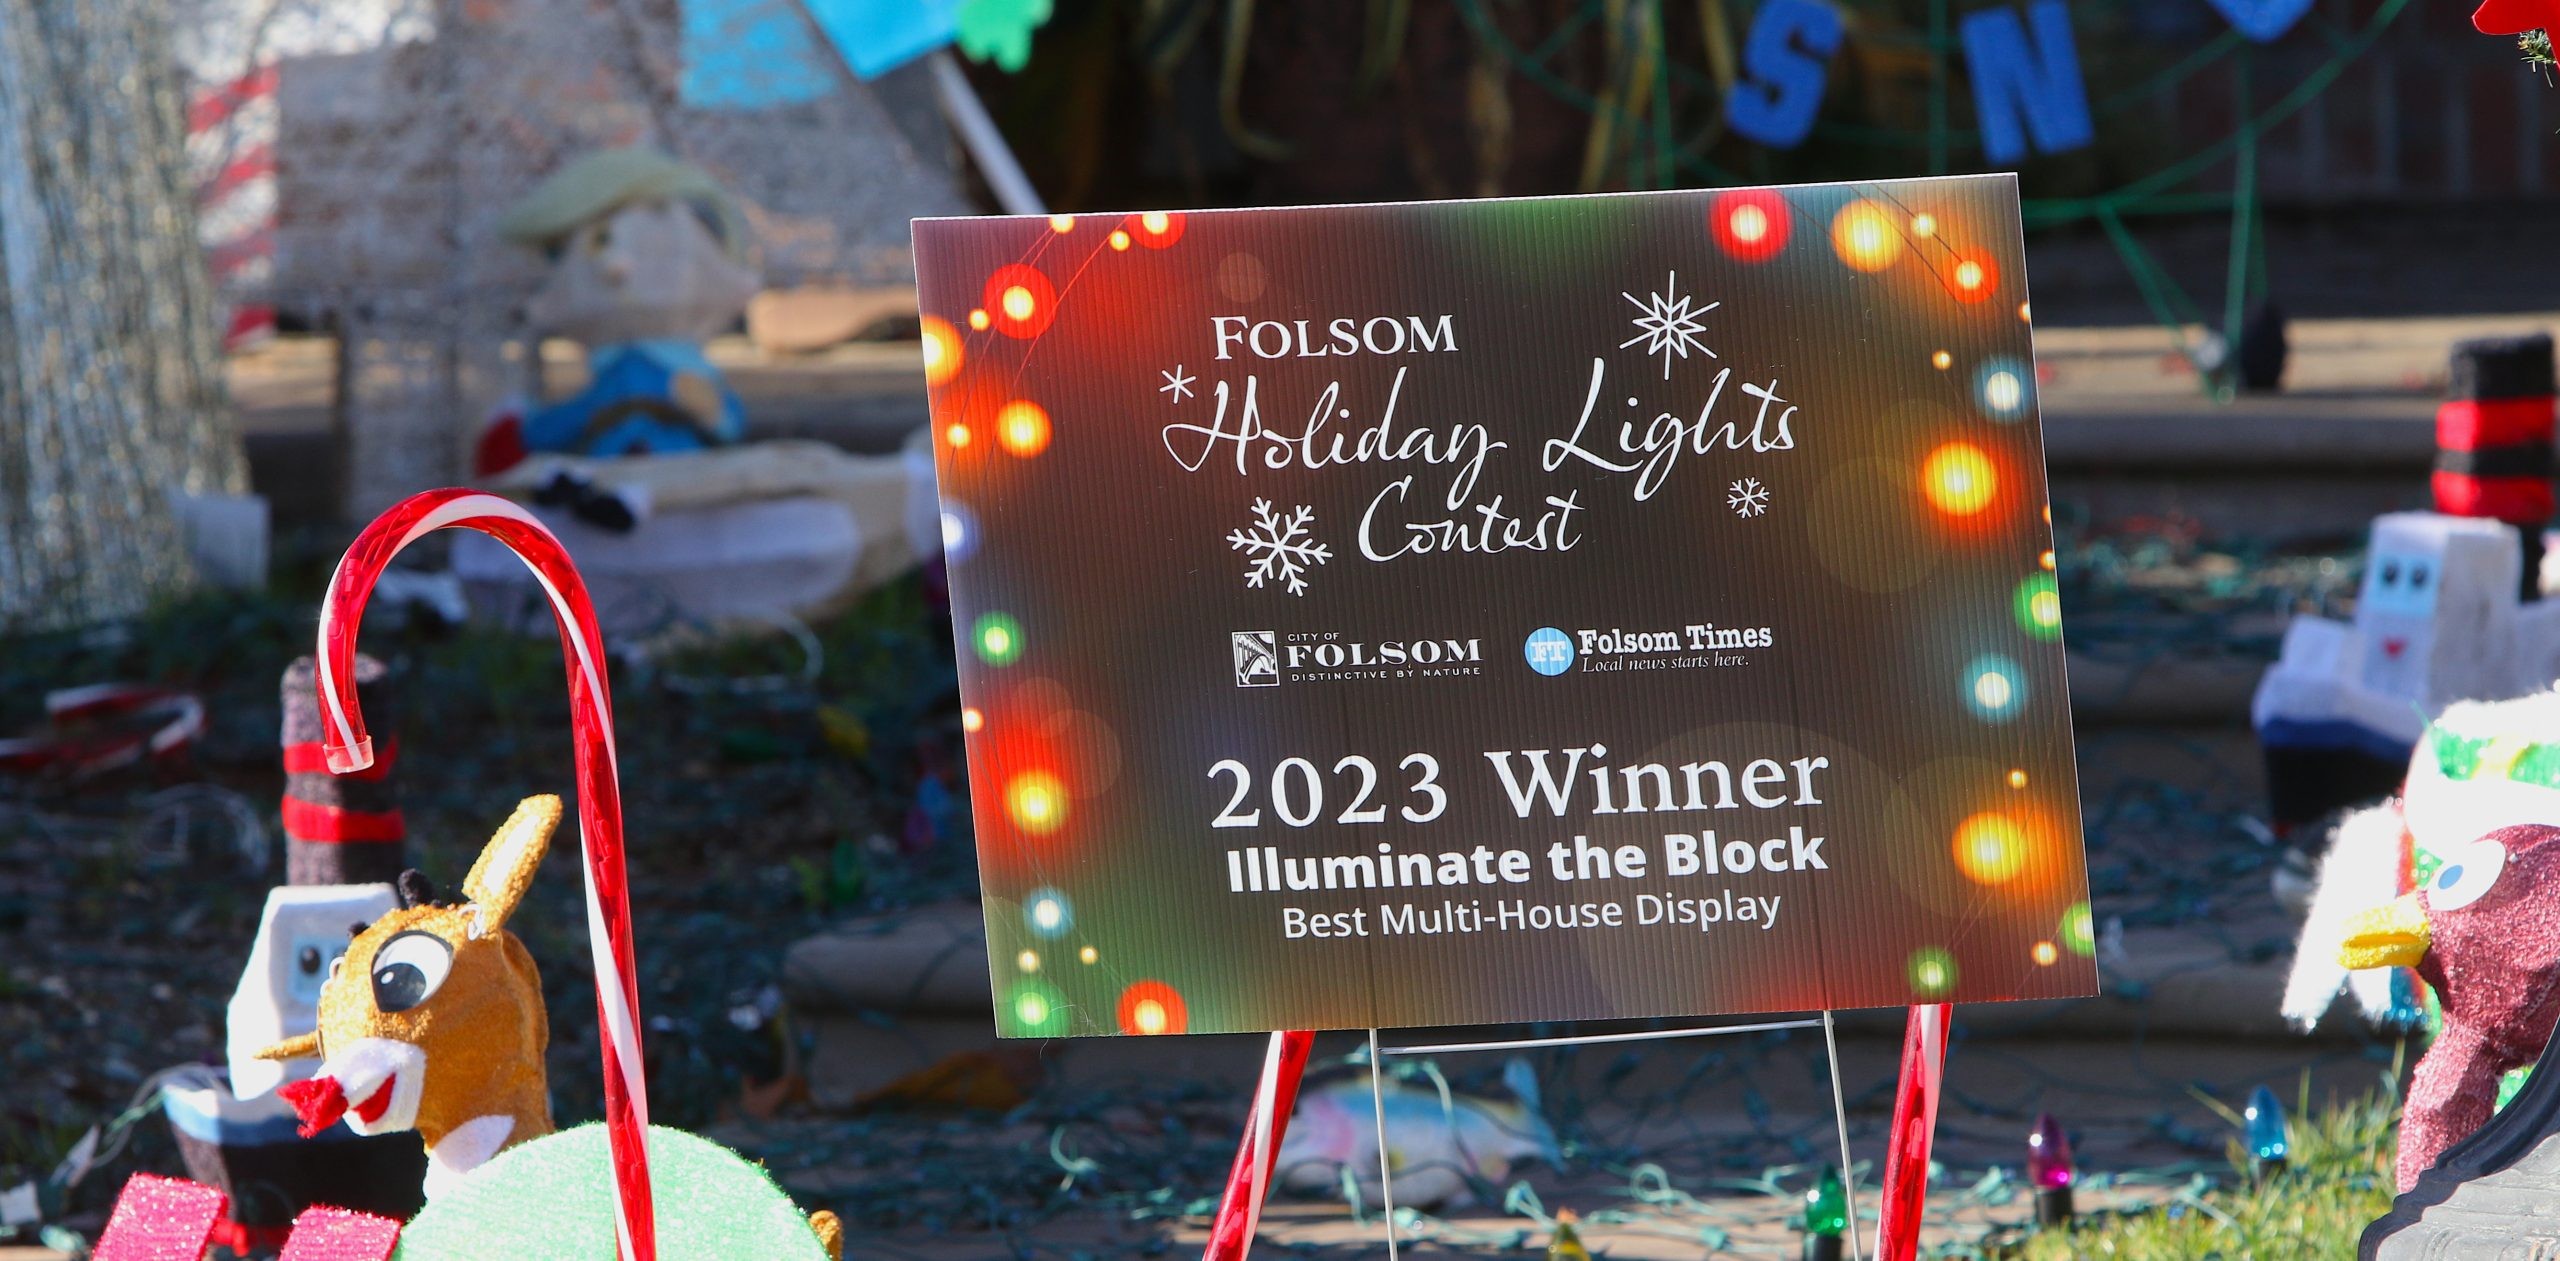 Winners named for City, Folsom Times Holiday Lighting Contest